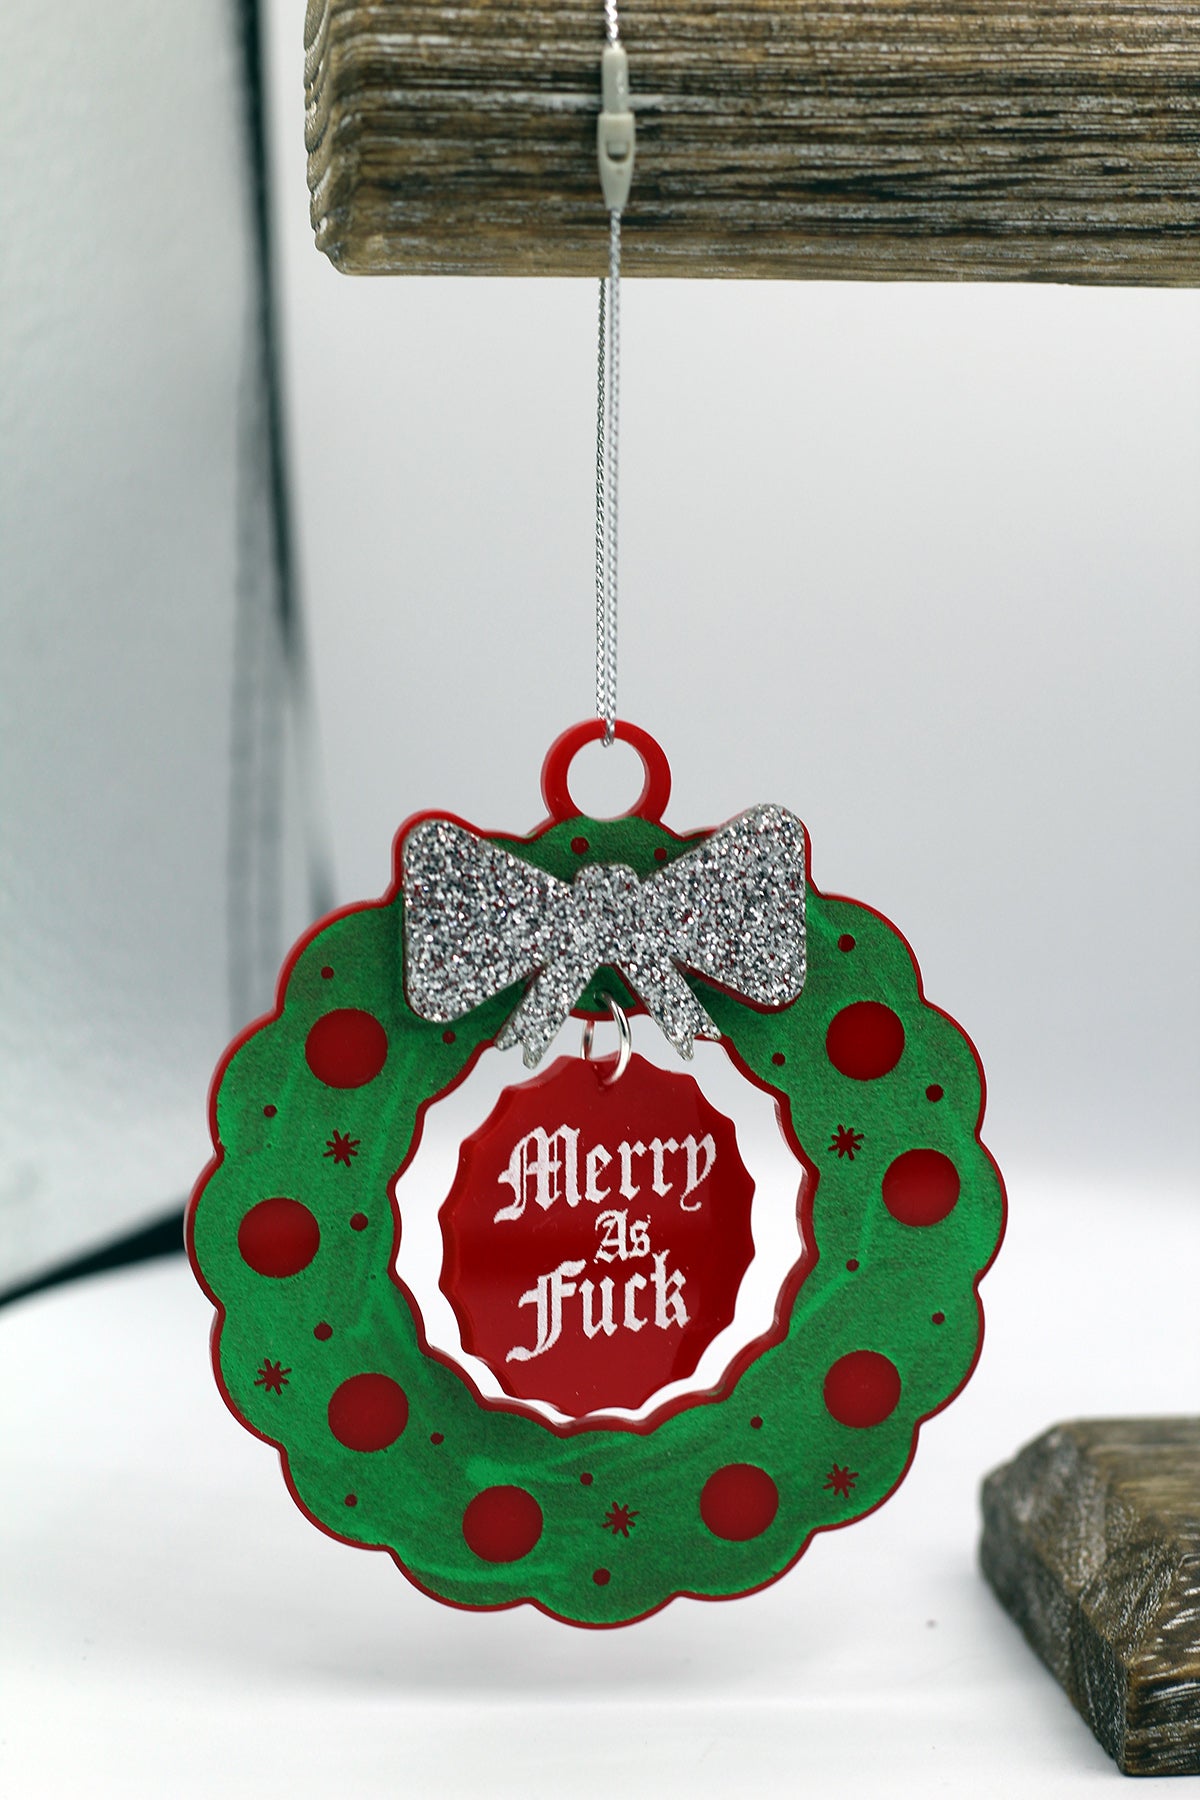 Awesome by Jenna: Merry ASF Ornament